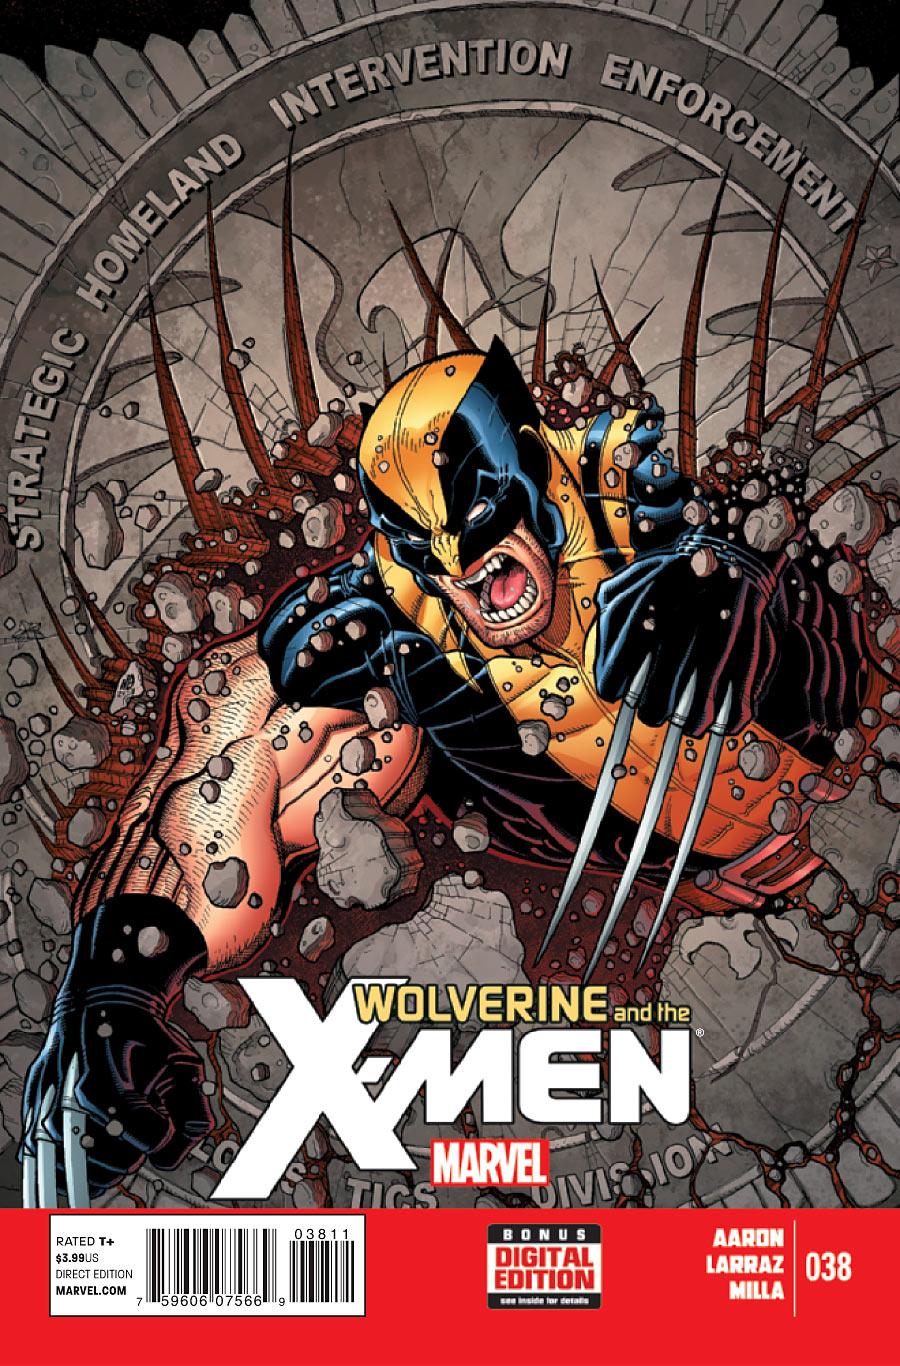 Wolverine and the X-Men Vol. 1 #38